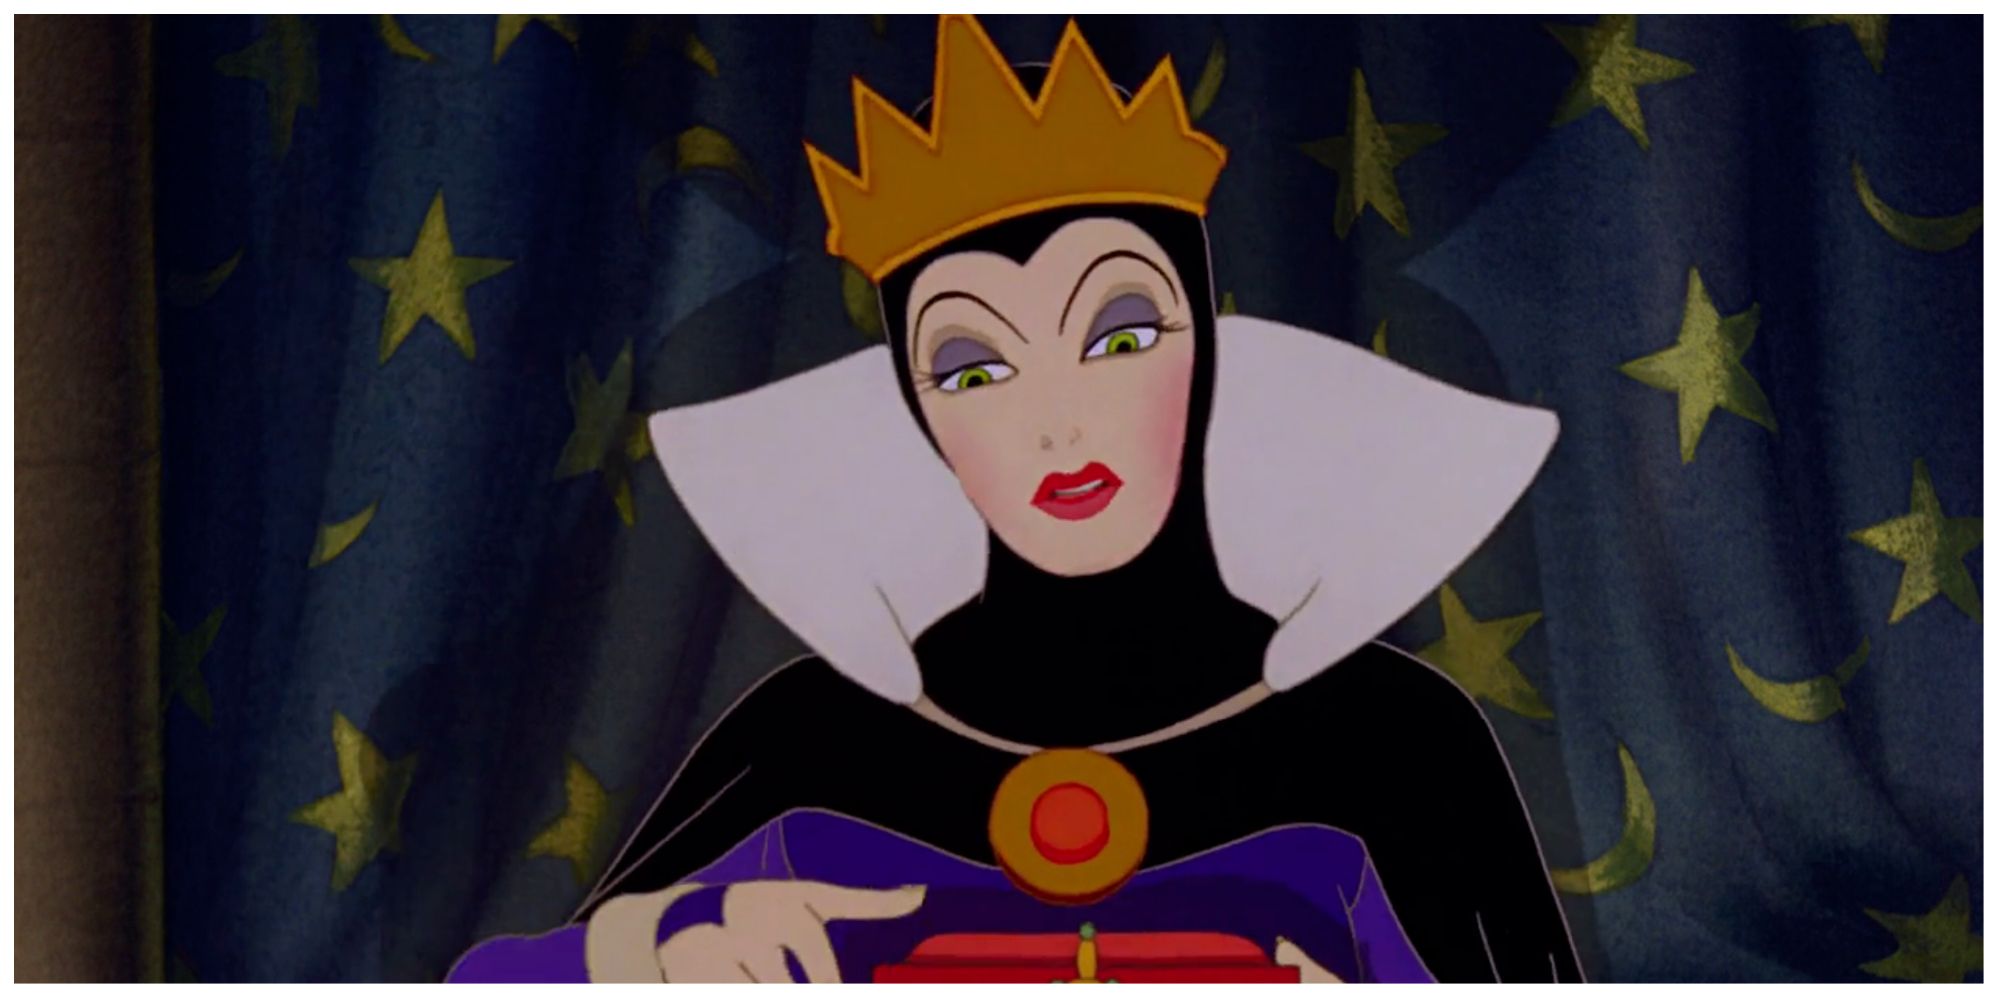 Queen Grimhilde from Snow White and the Seven Dwarfs